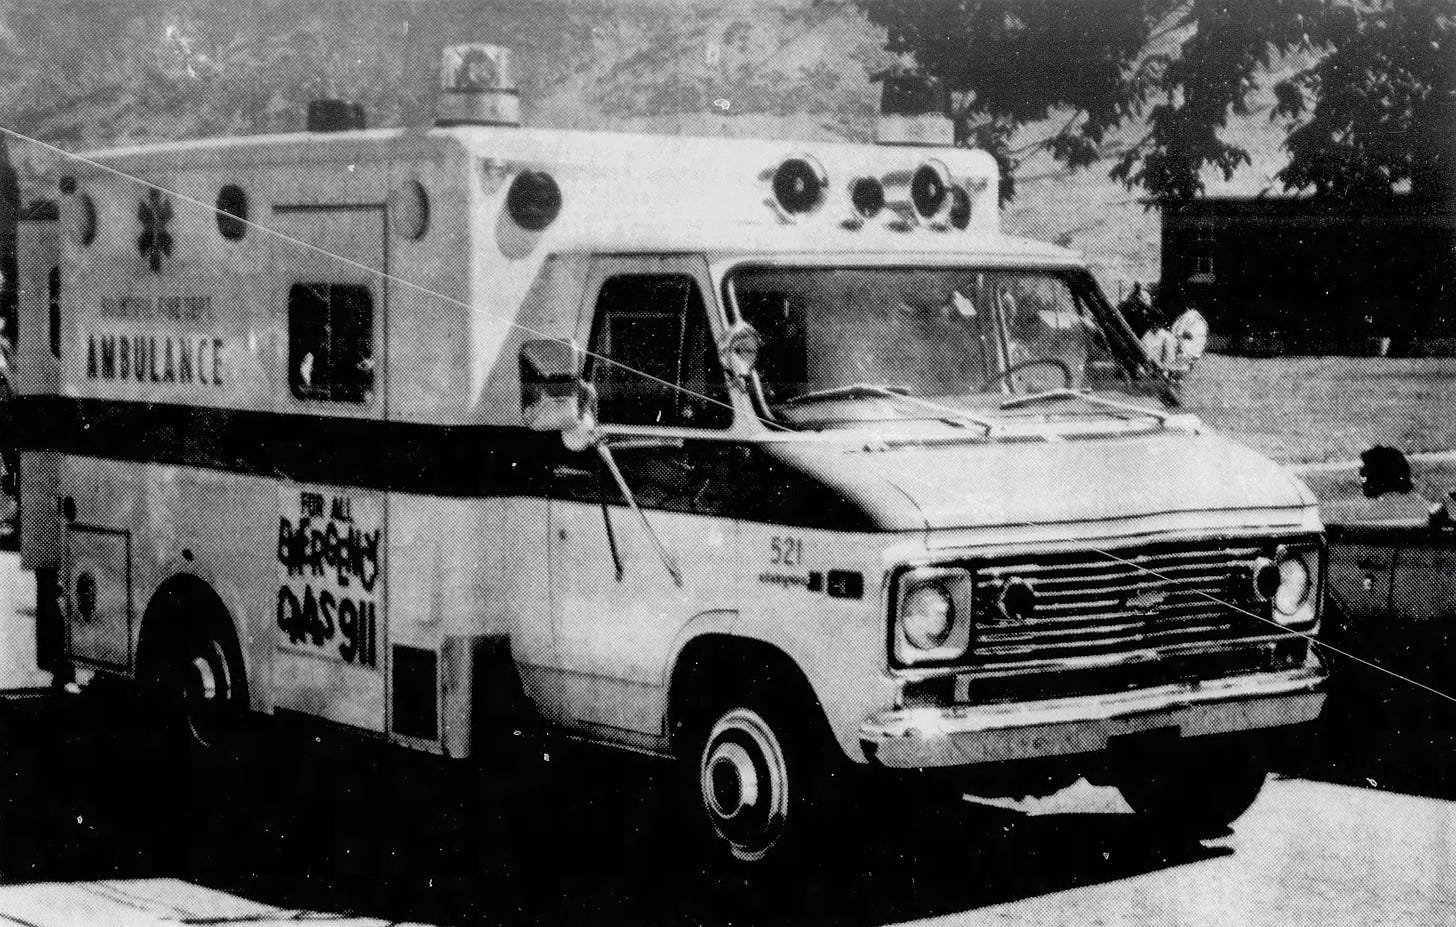 A black-and-white newspaper photograph of a new ambulance, parked in front of an expanse of lawn on a bright day with hills in the background.